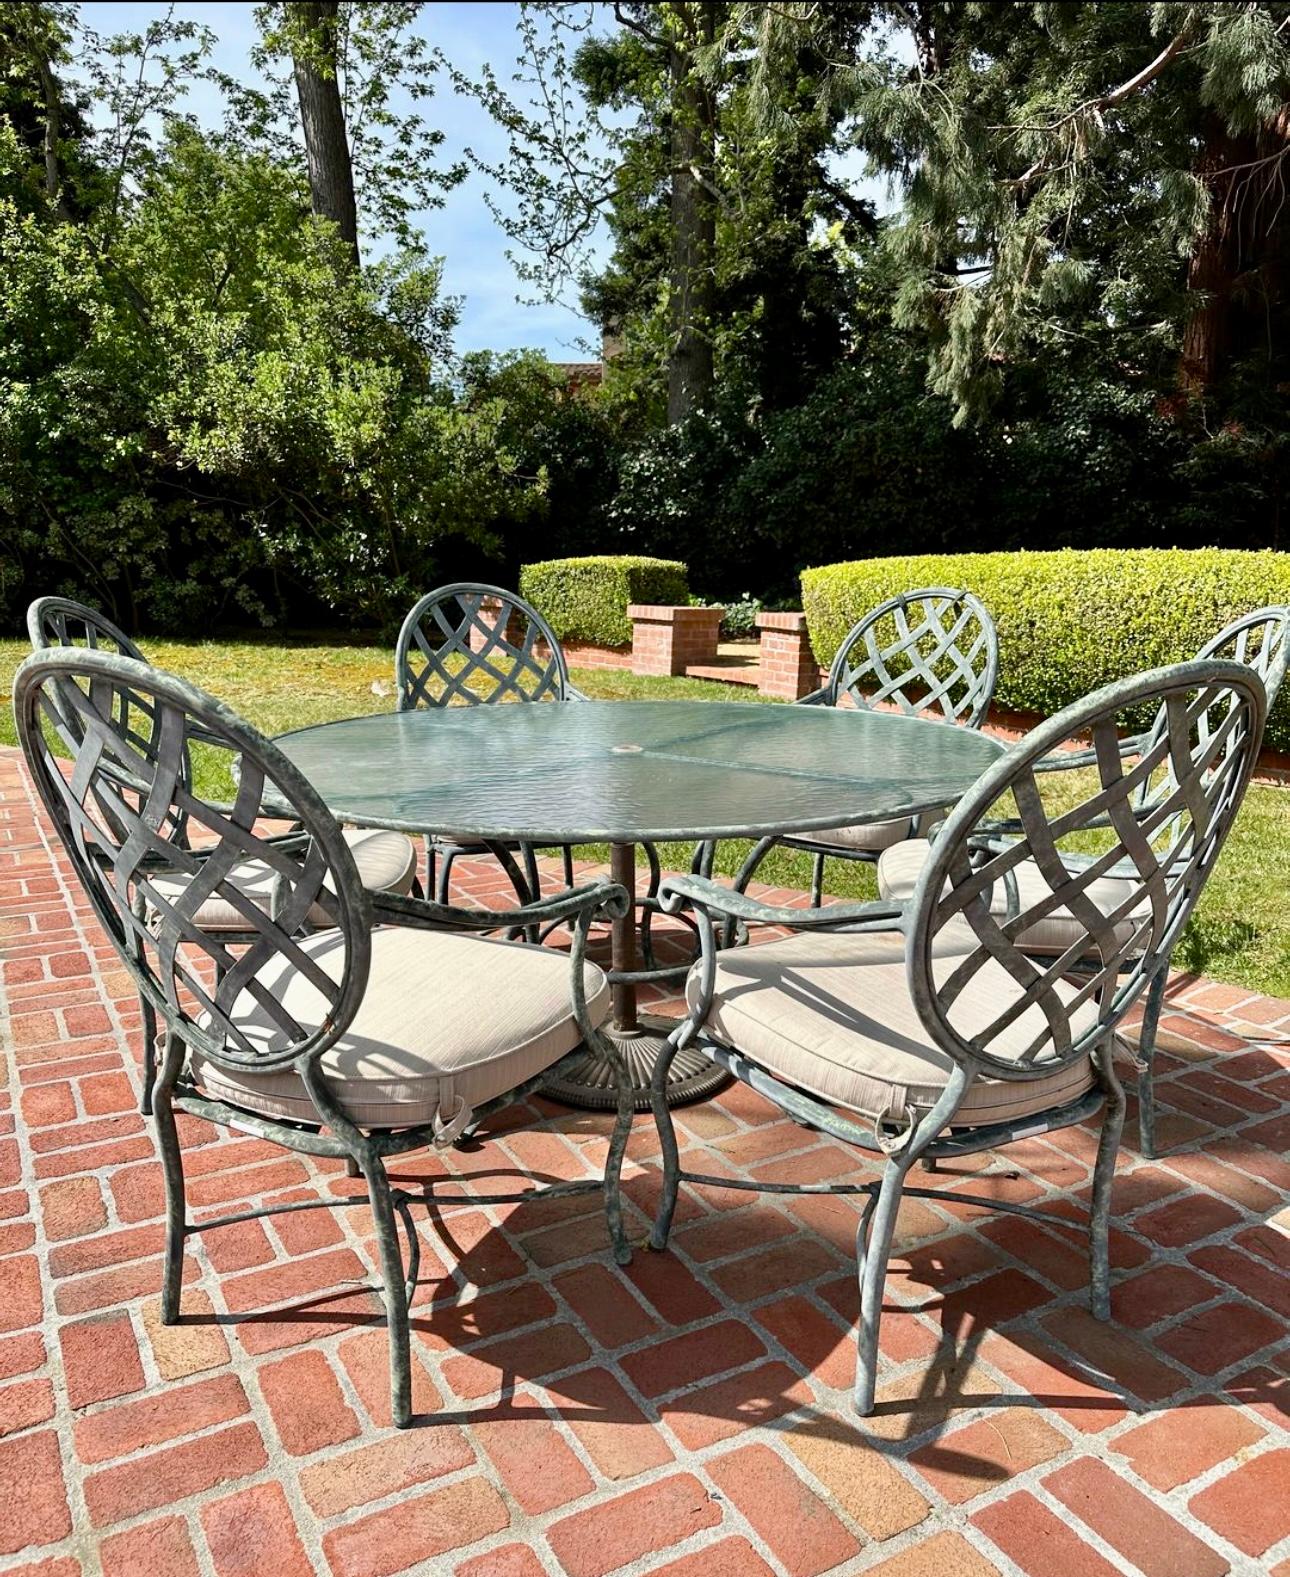 American Craftsman Brown Jordan outdoor Dining set, glass top table and 6 armchairs, Made in USA